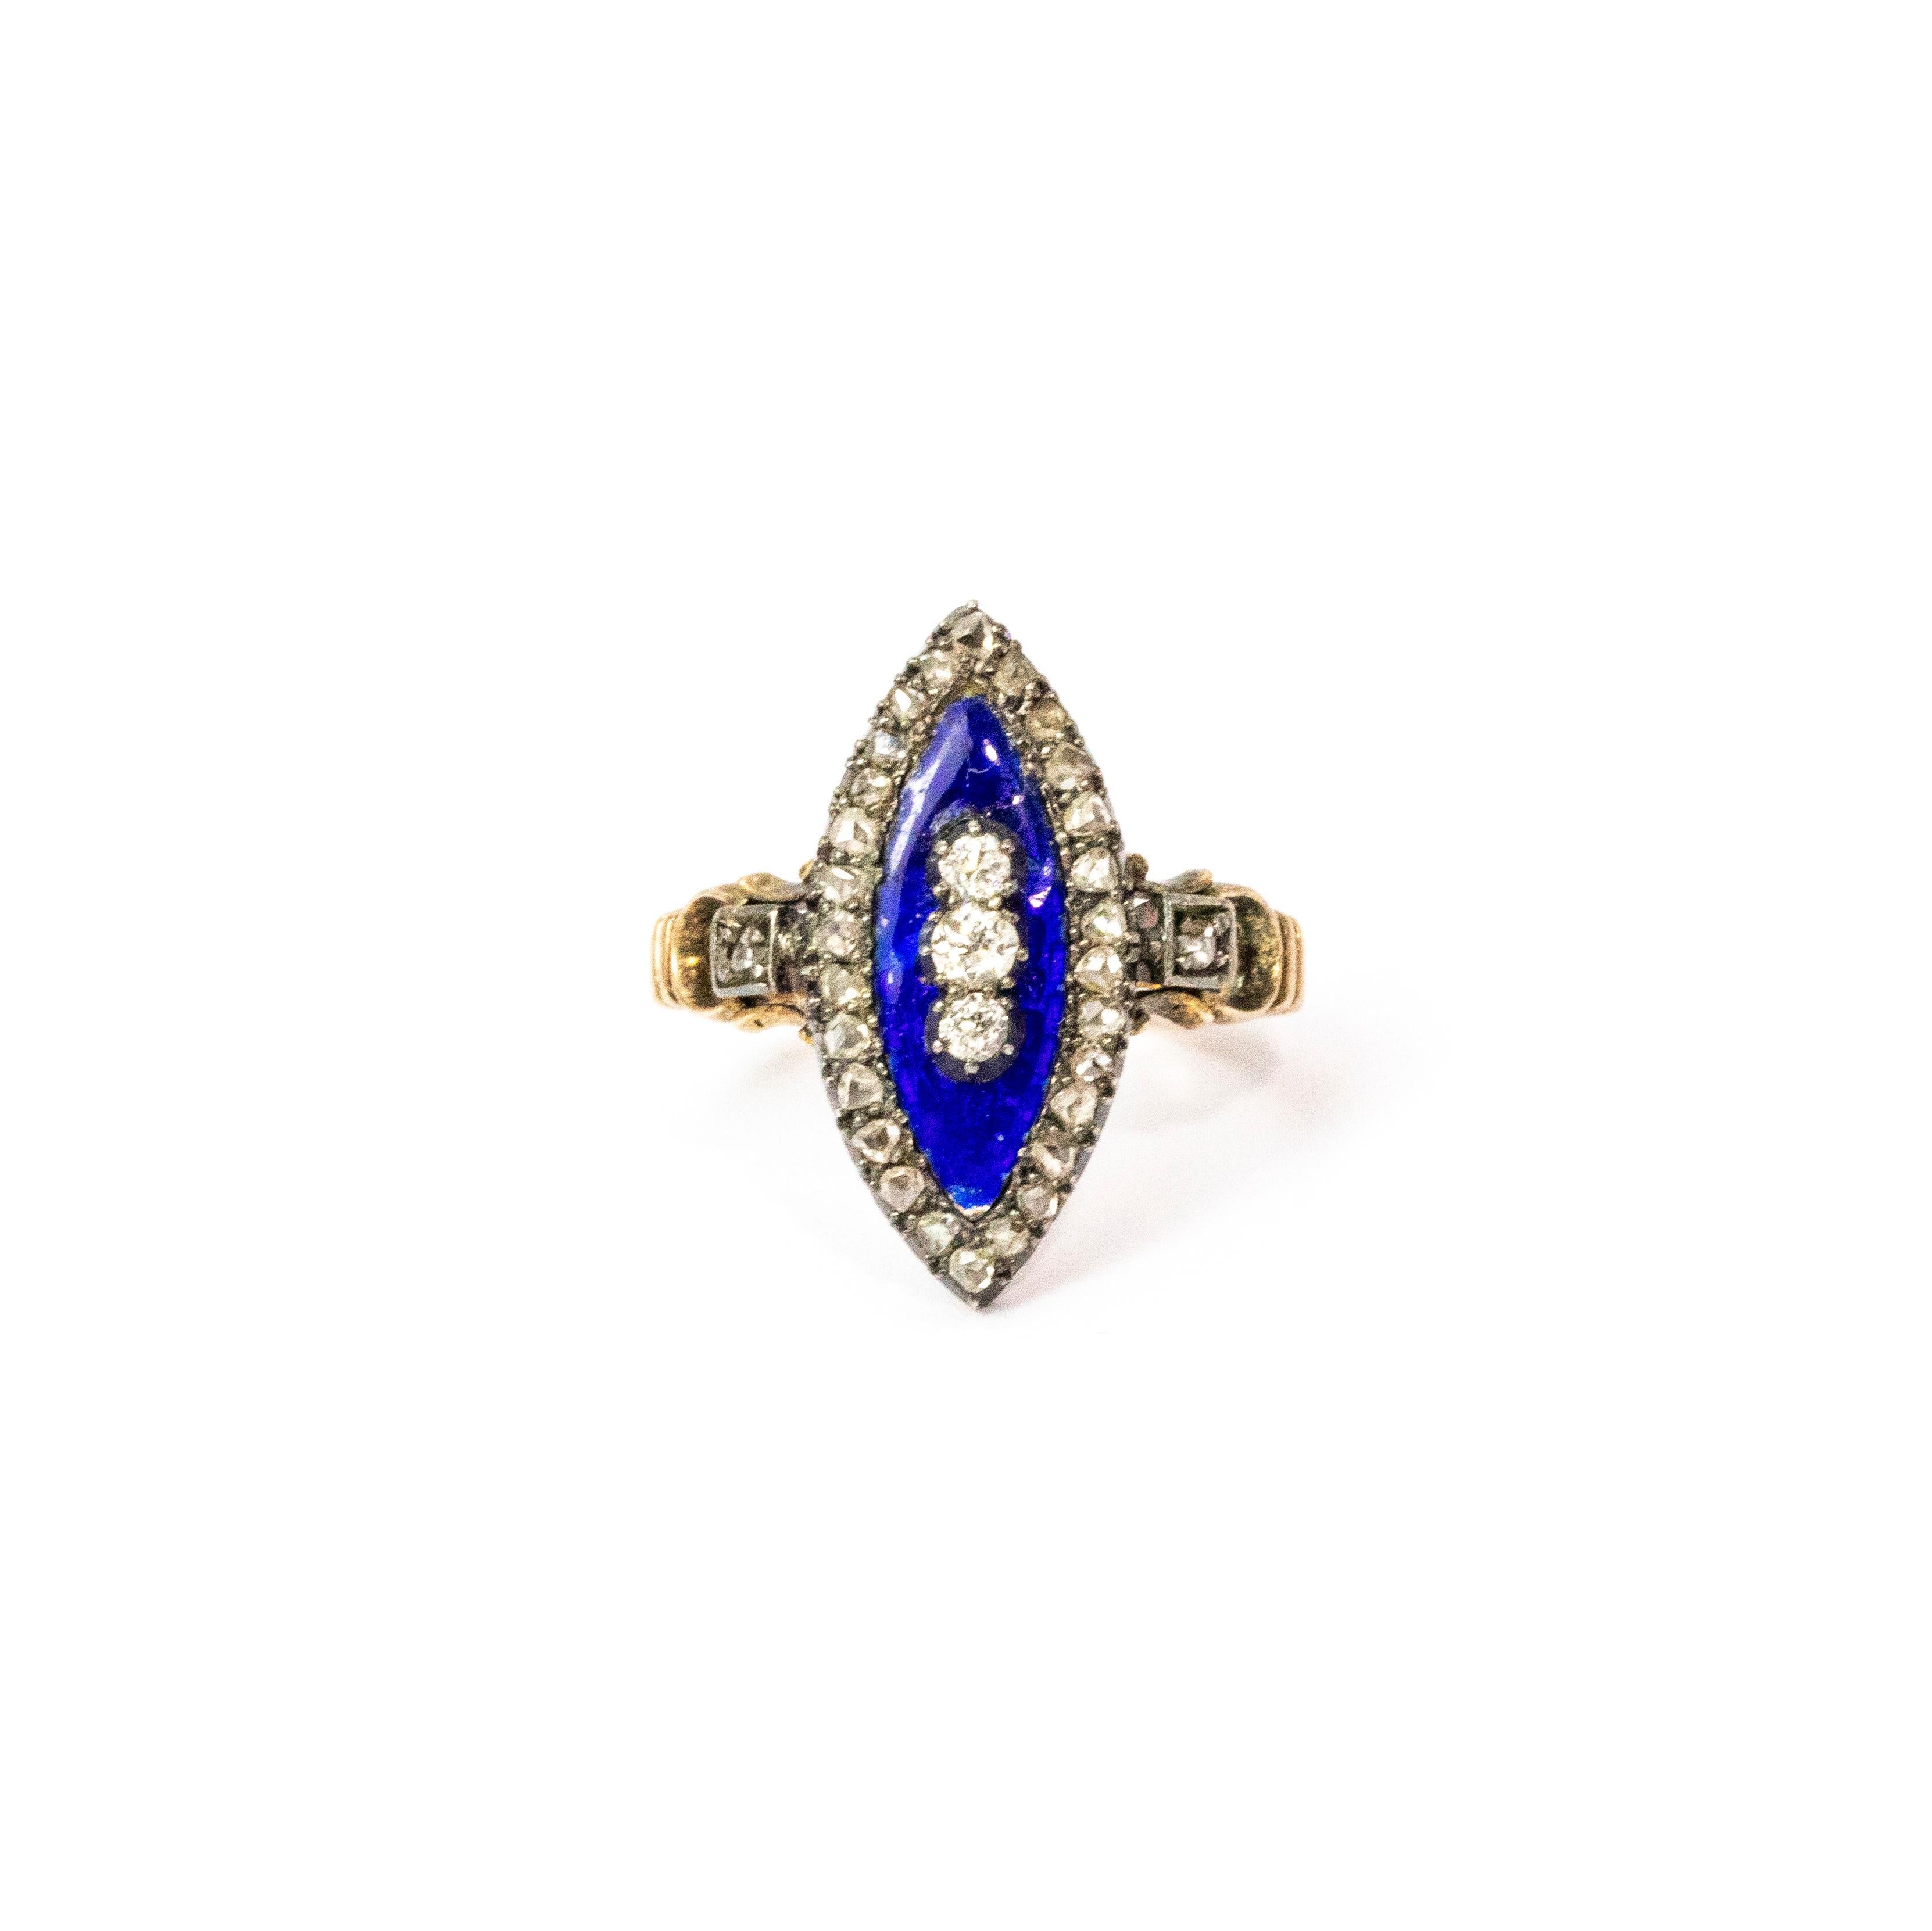 A superb late Georgian ring crafted circa 1830. The navette panel is blue enamel set with a trip of fine white diamonds stacked at its centre, with more beautiful diamonds around its edges and extending across the rings shoulders. Wonderfully formed